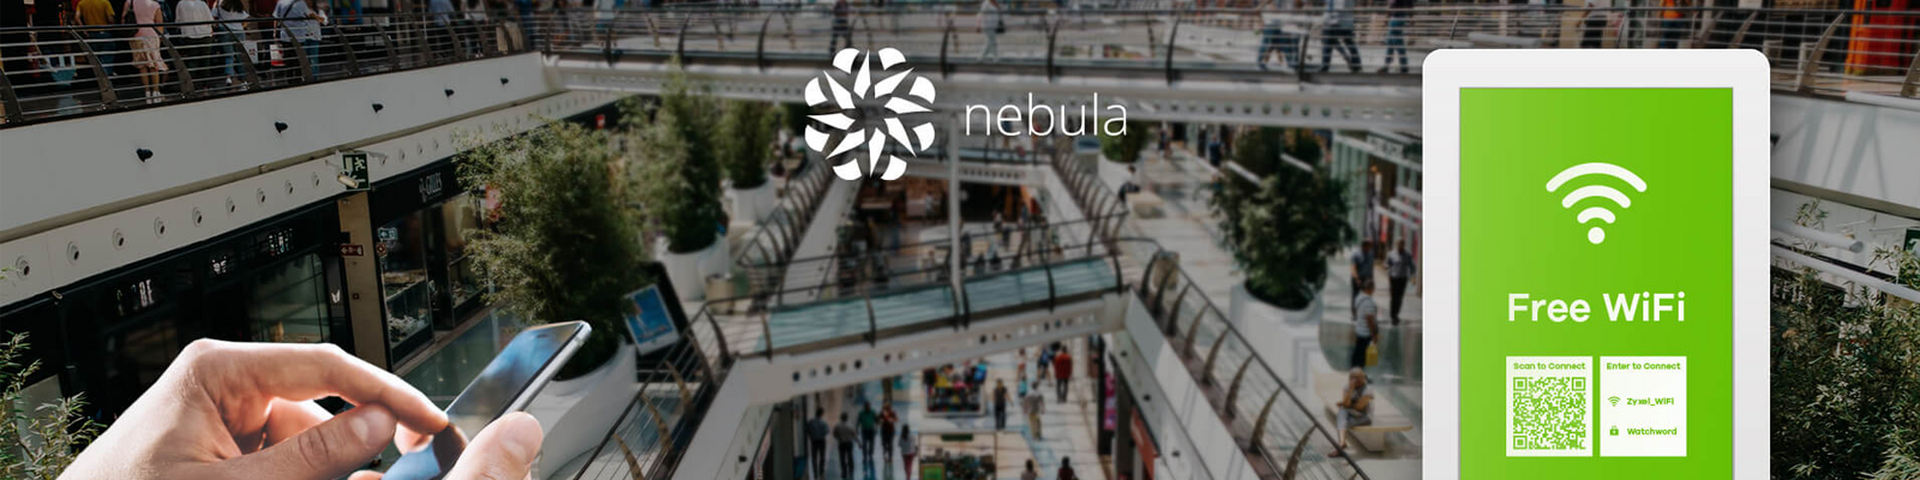 New Nebula makes it easier to manage networks effectively